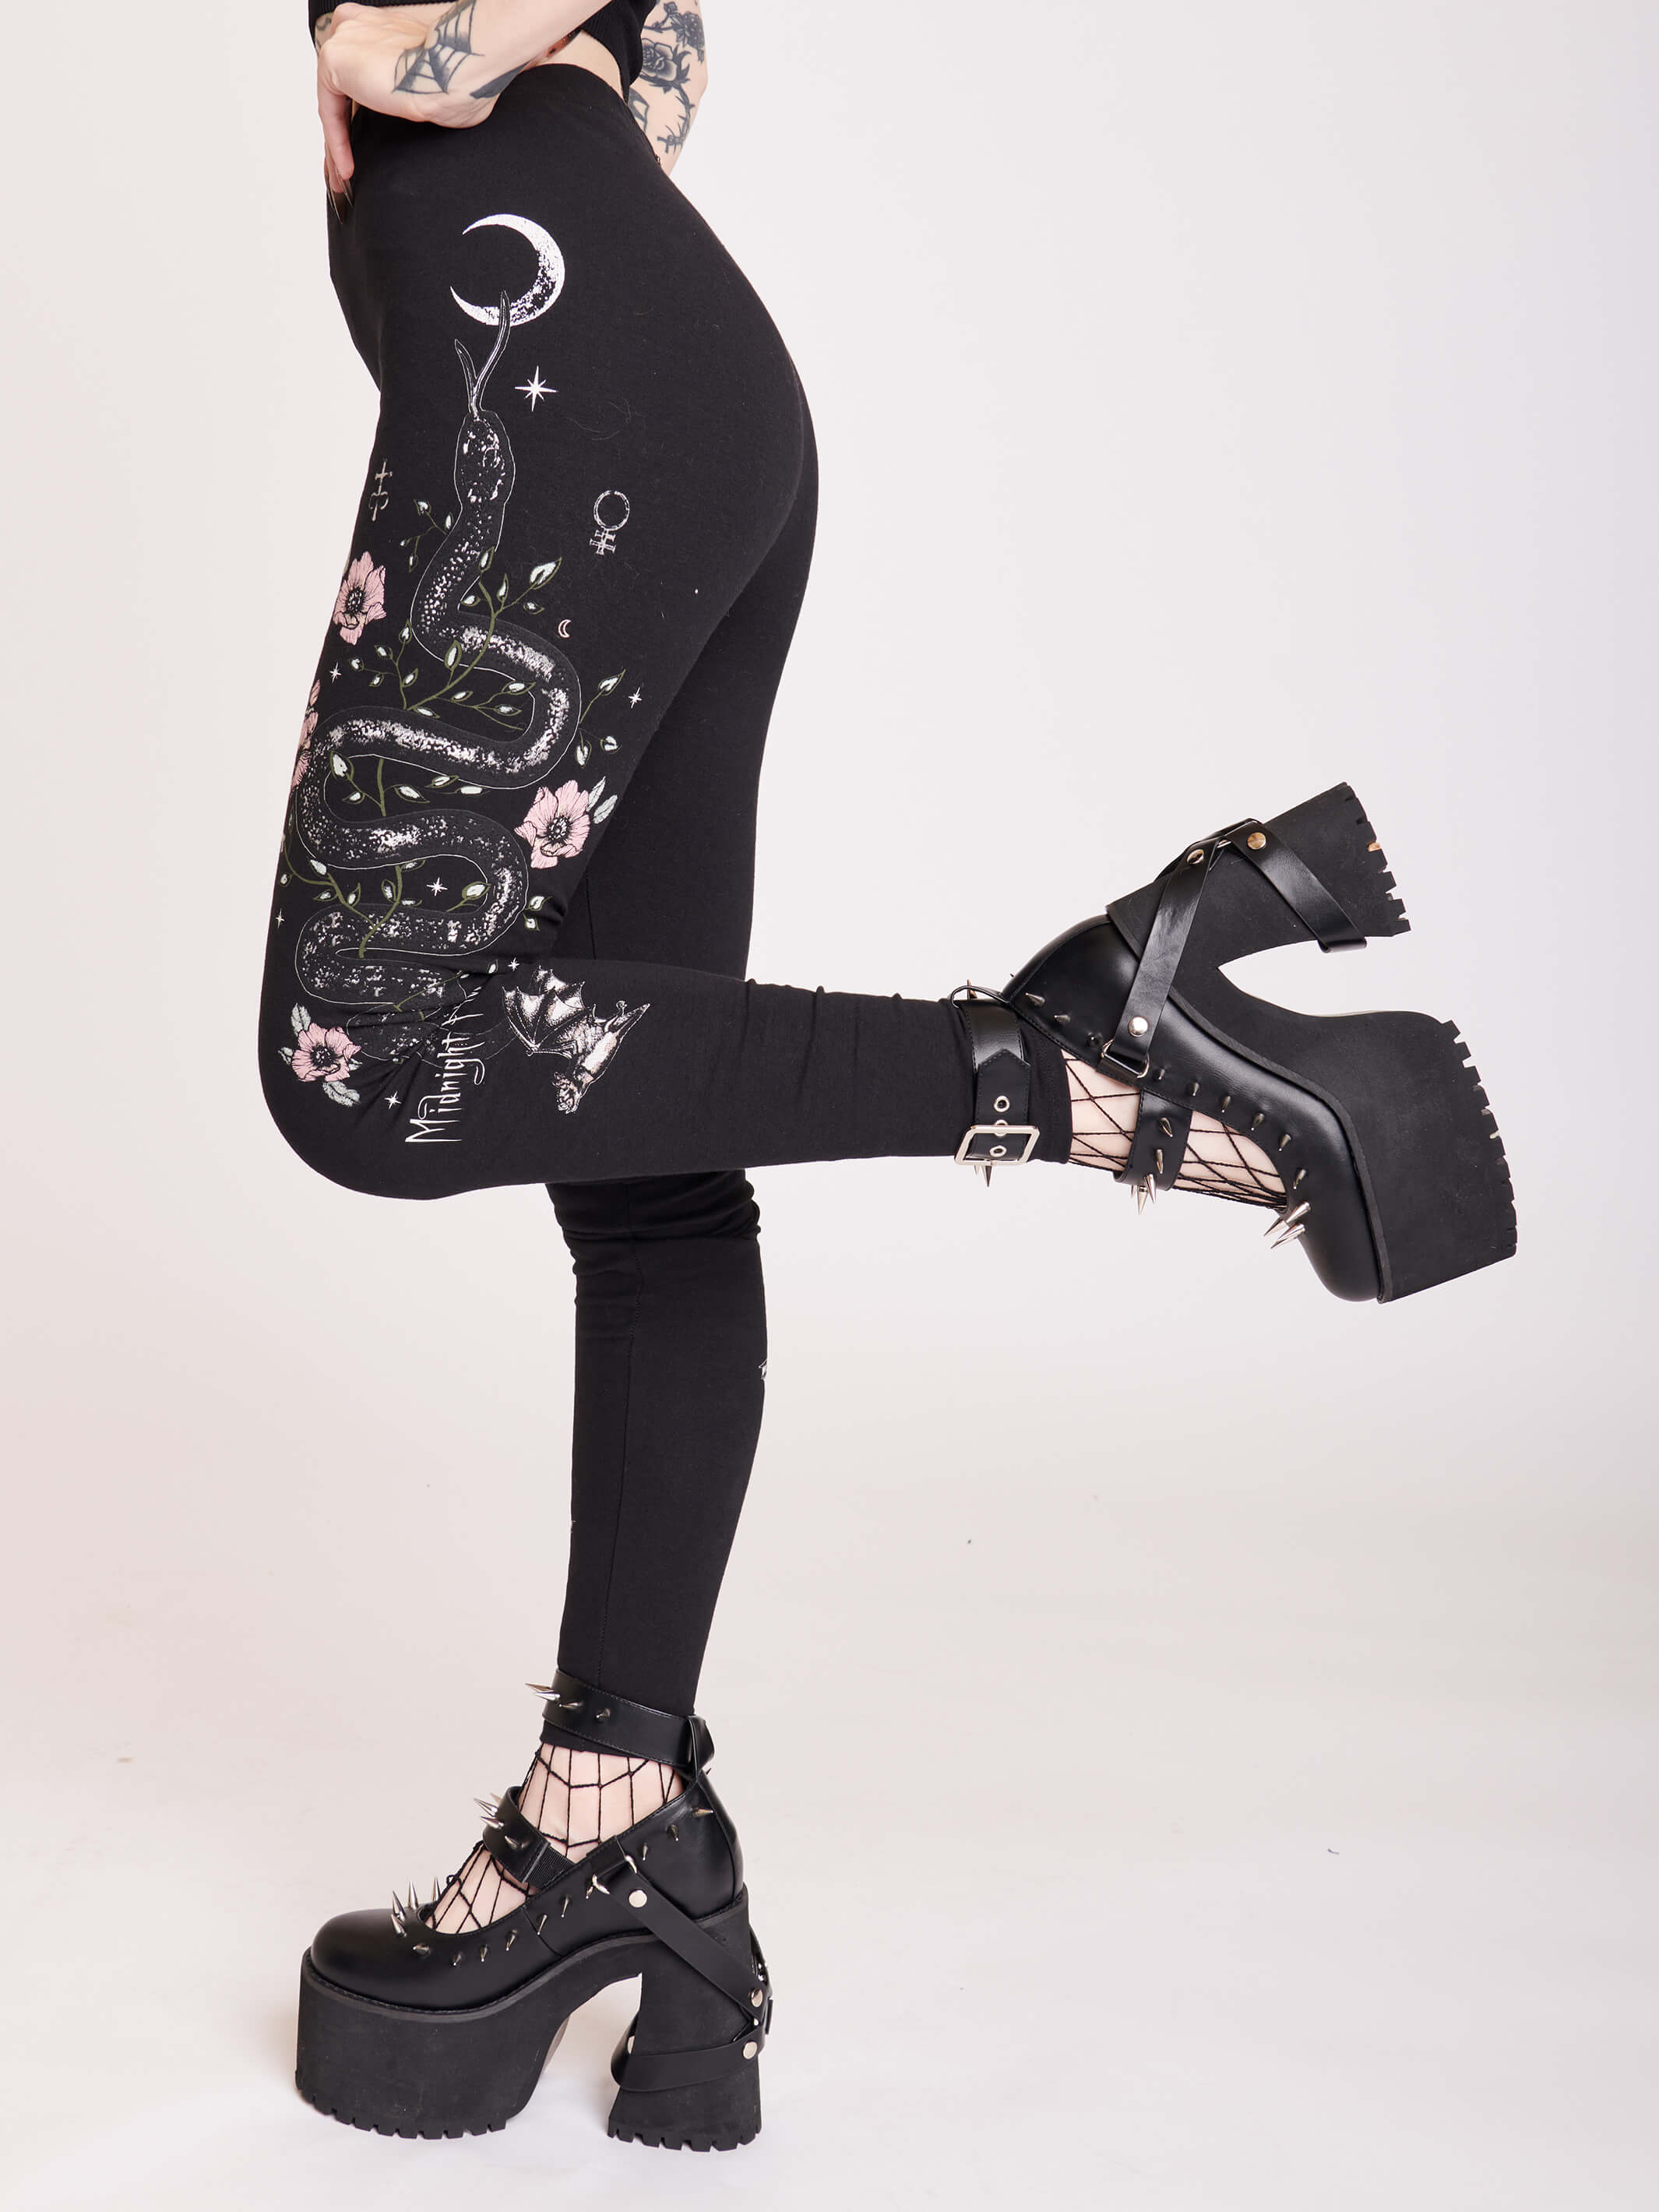 Black legging with snake and flower graphic